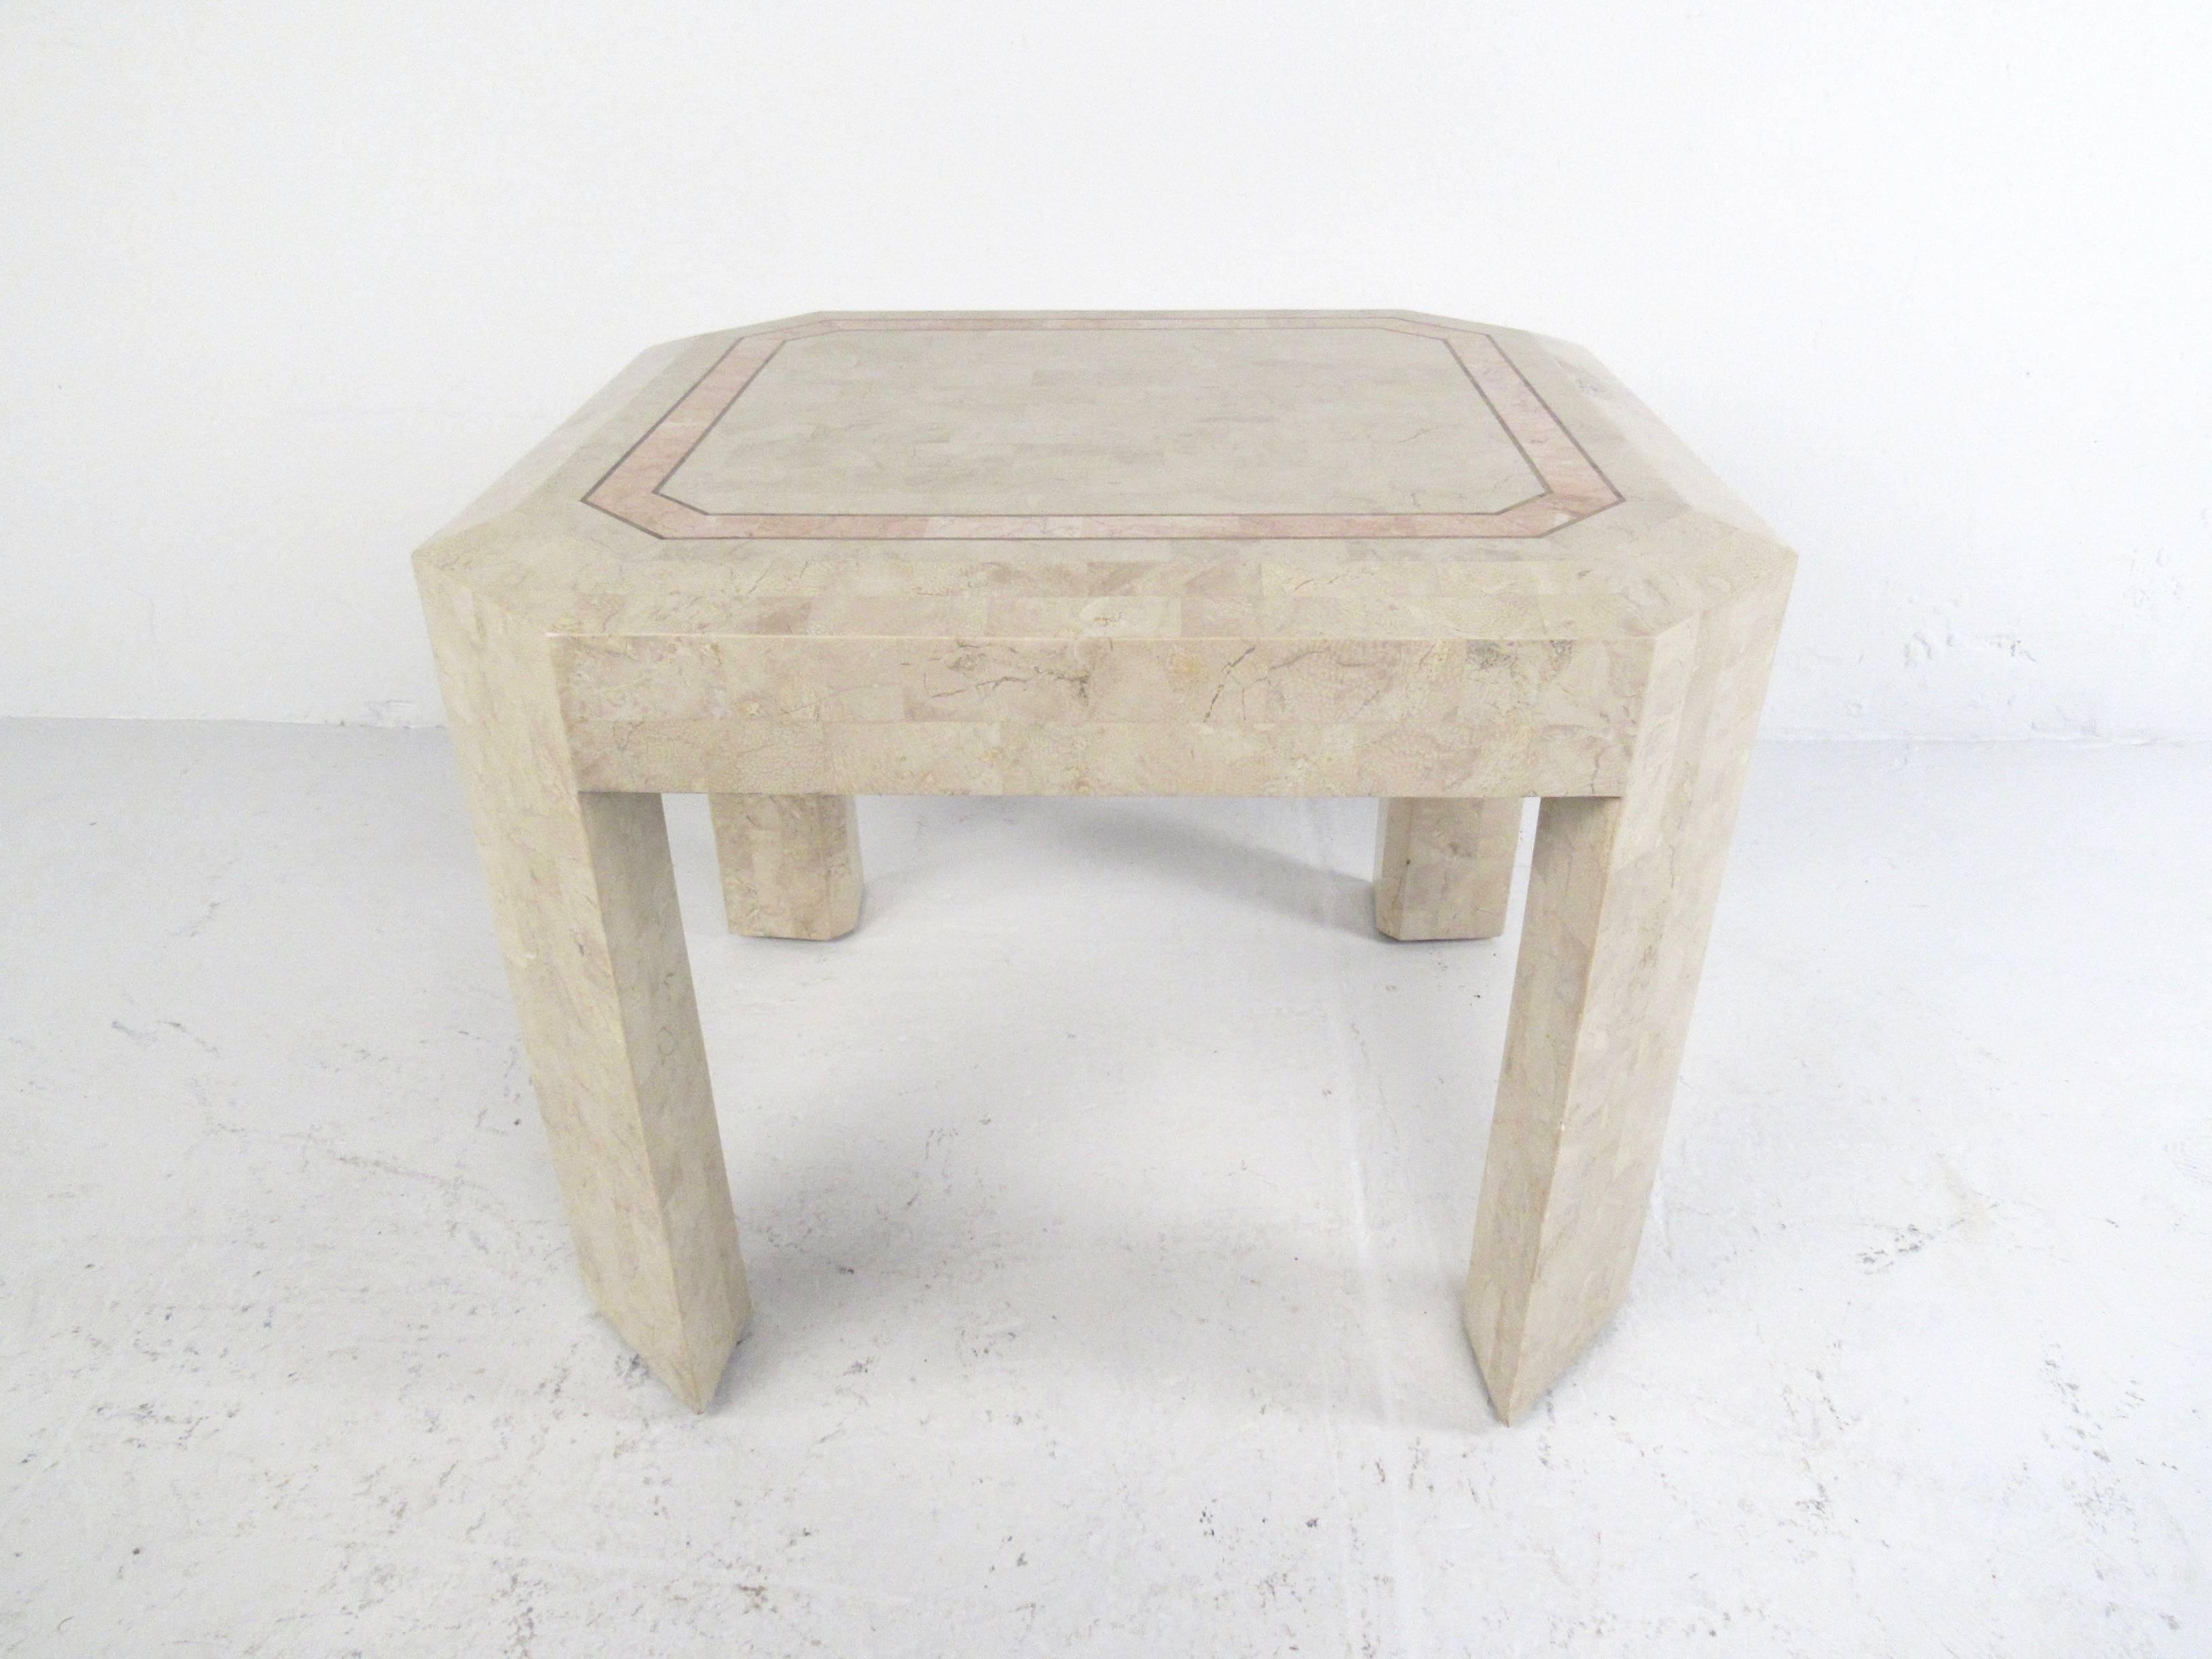 This elegant tessellated stone end table features sculpted legs, mosaic tile like design, and unique banded two-tone inlay. Perfect height for use as sofa end table or as an occasional side table in any office or seating setting. Please confirm item